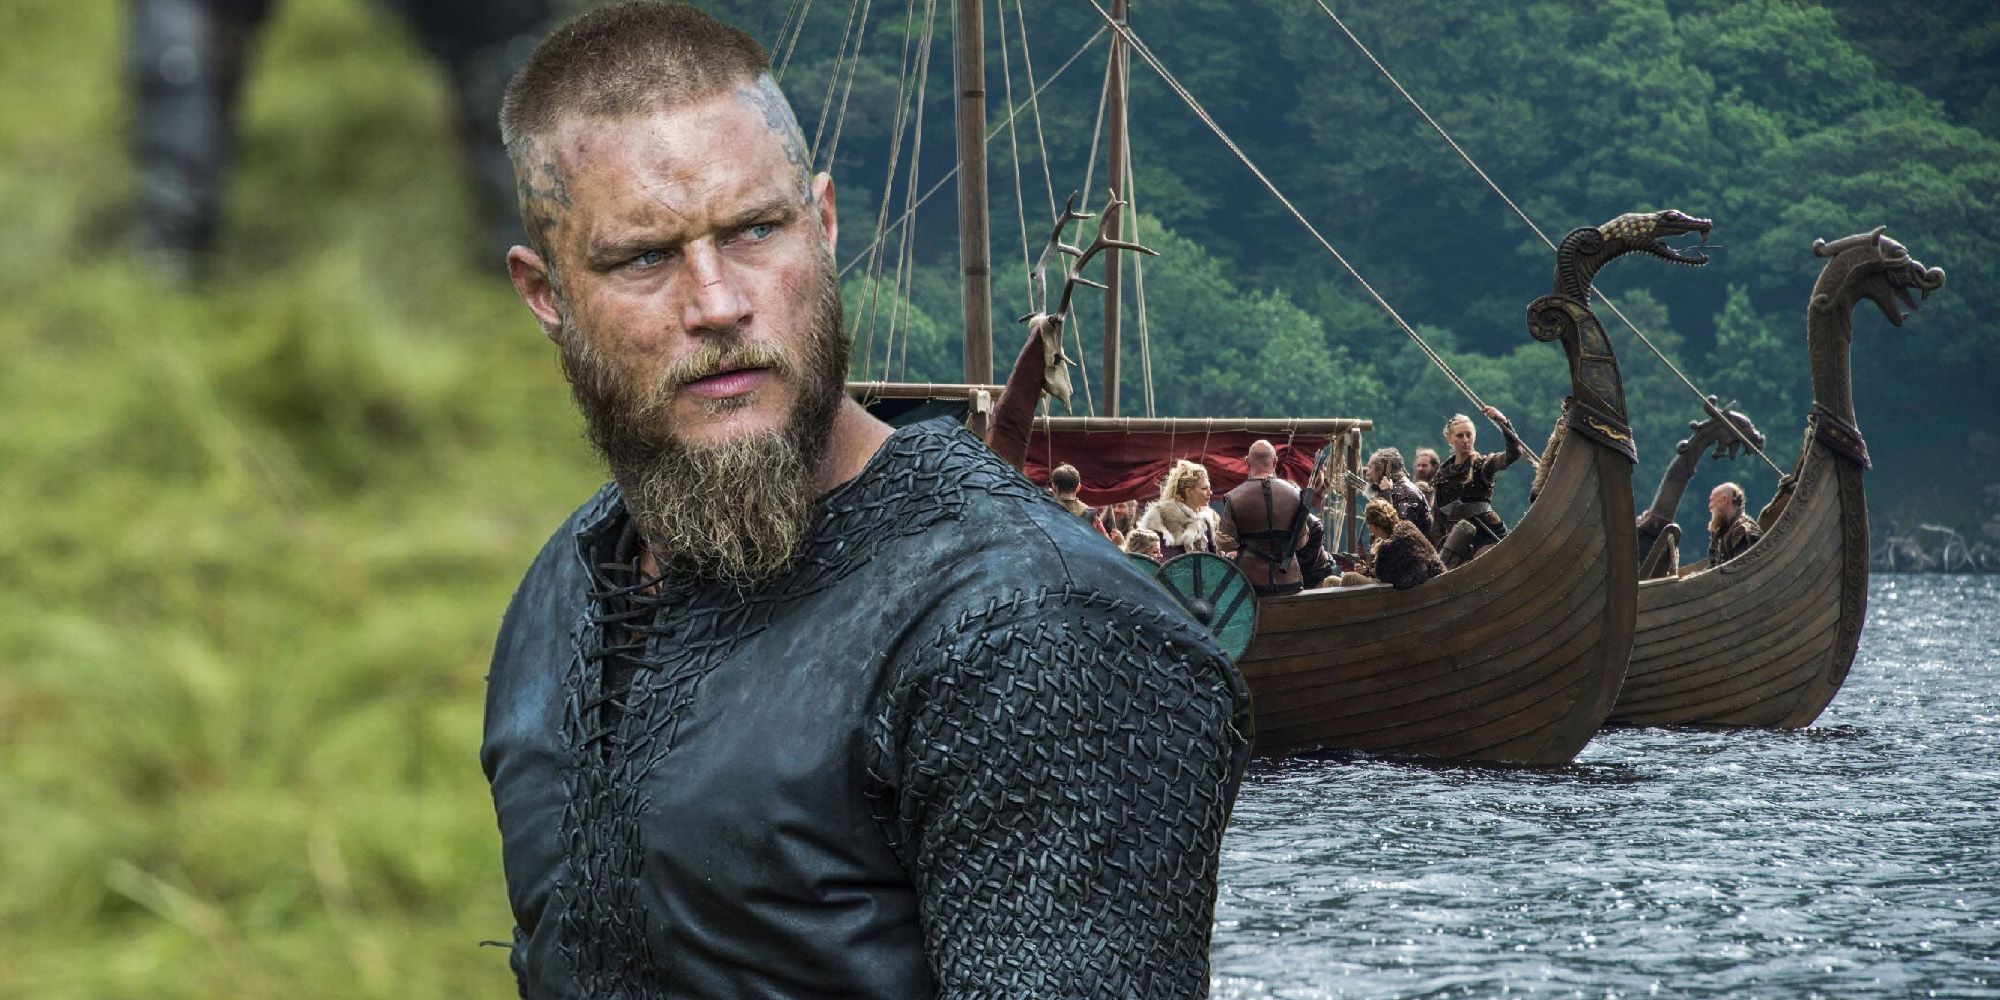 Plague Miniseries In Development From Vikings Show Creator